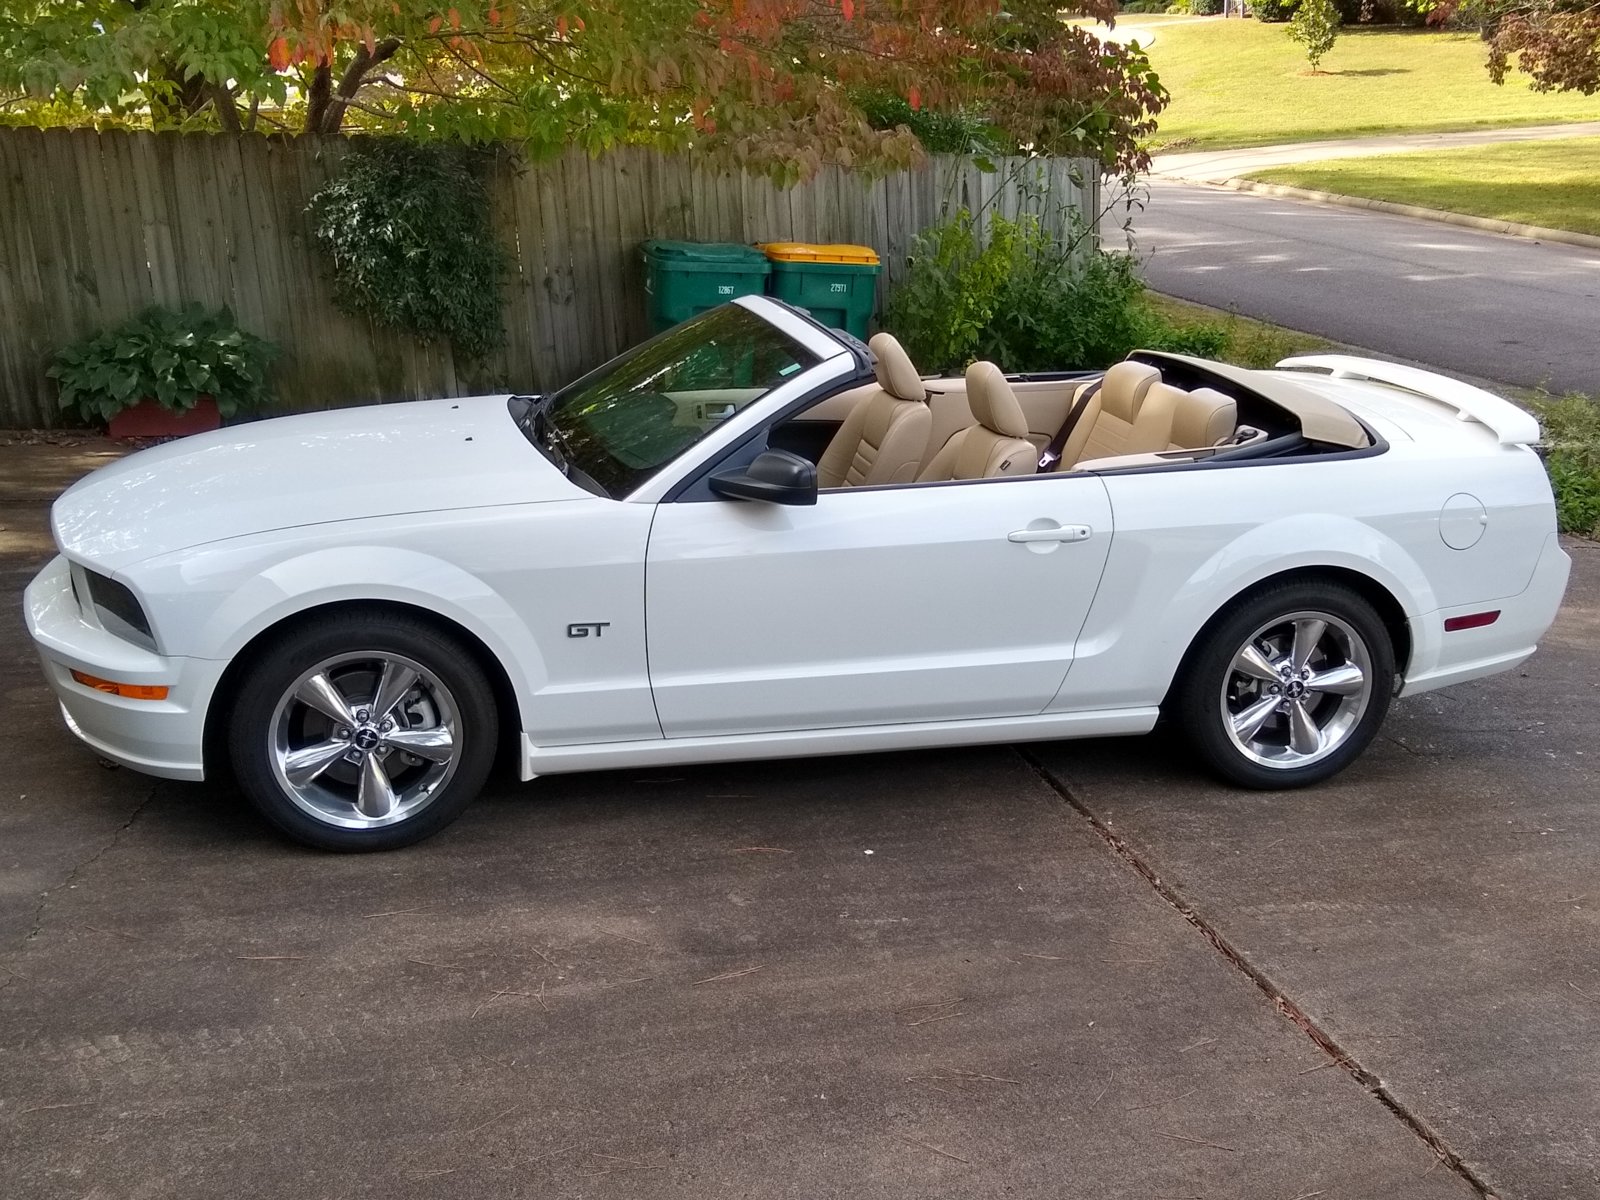 Sold 2006 White Mustang Gt Convertible Mustang Forums At